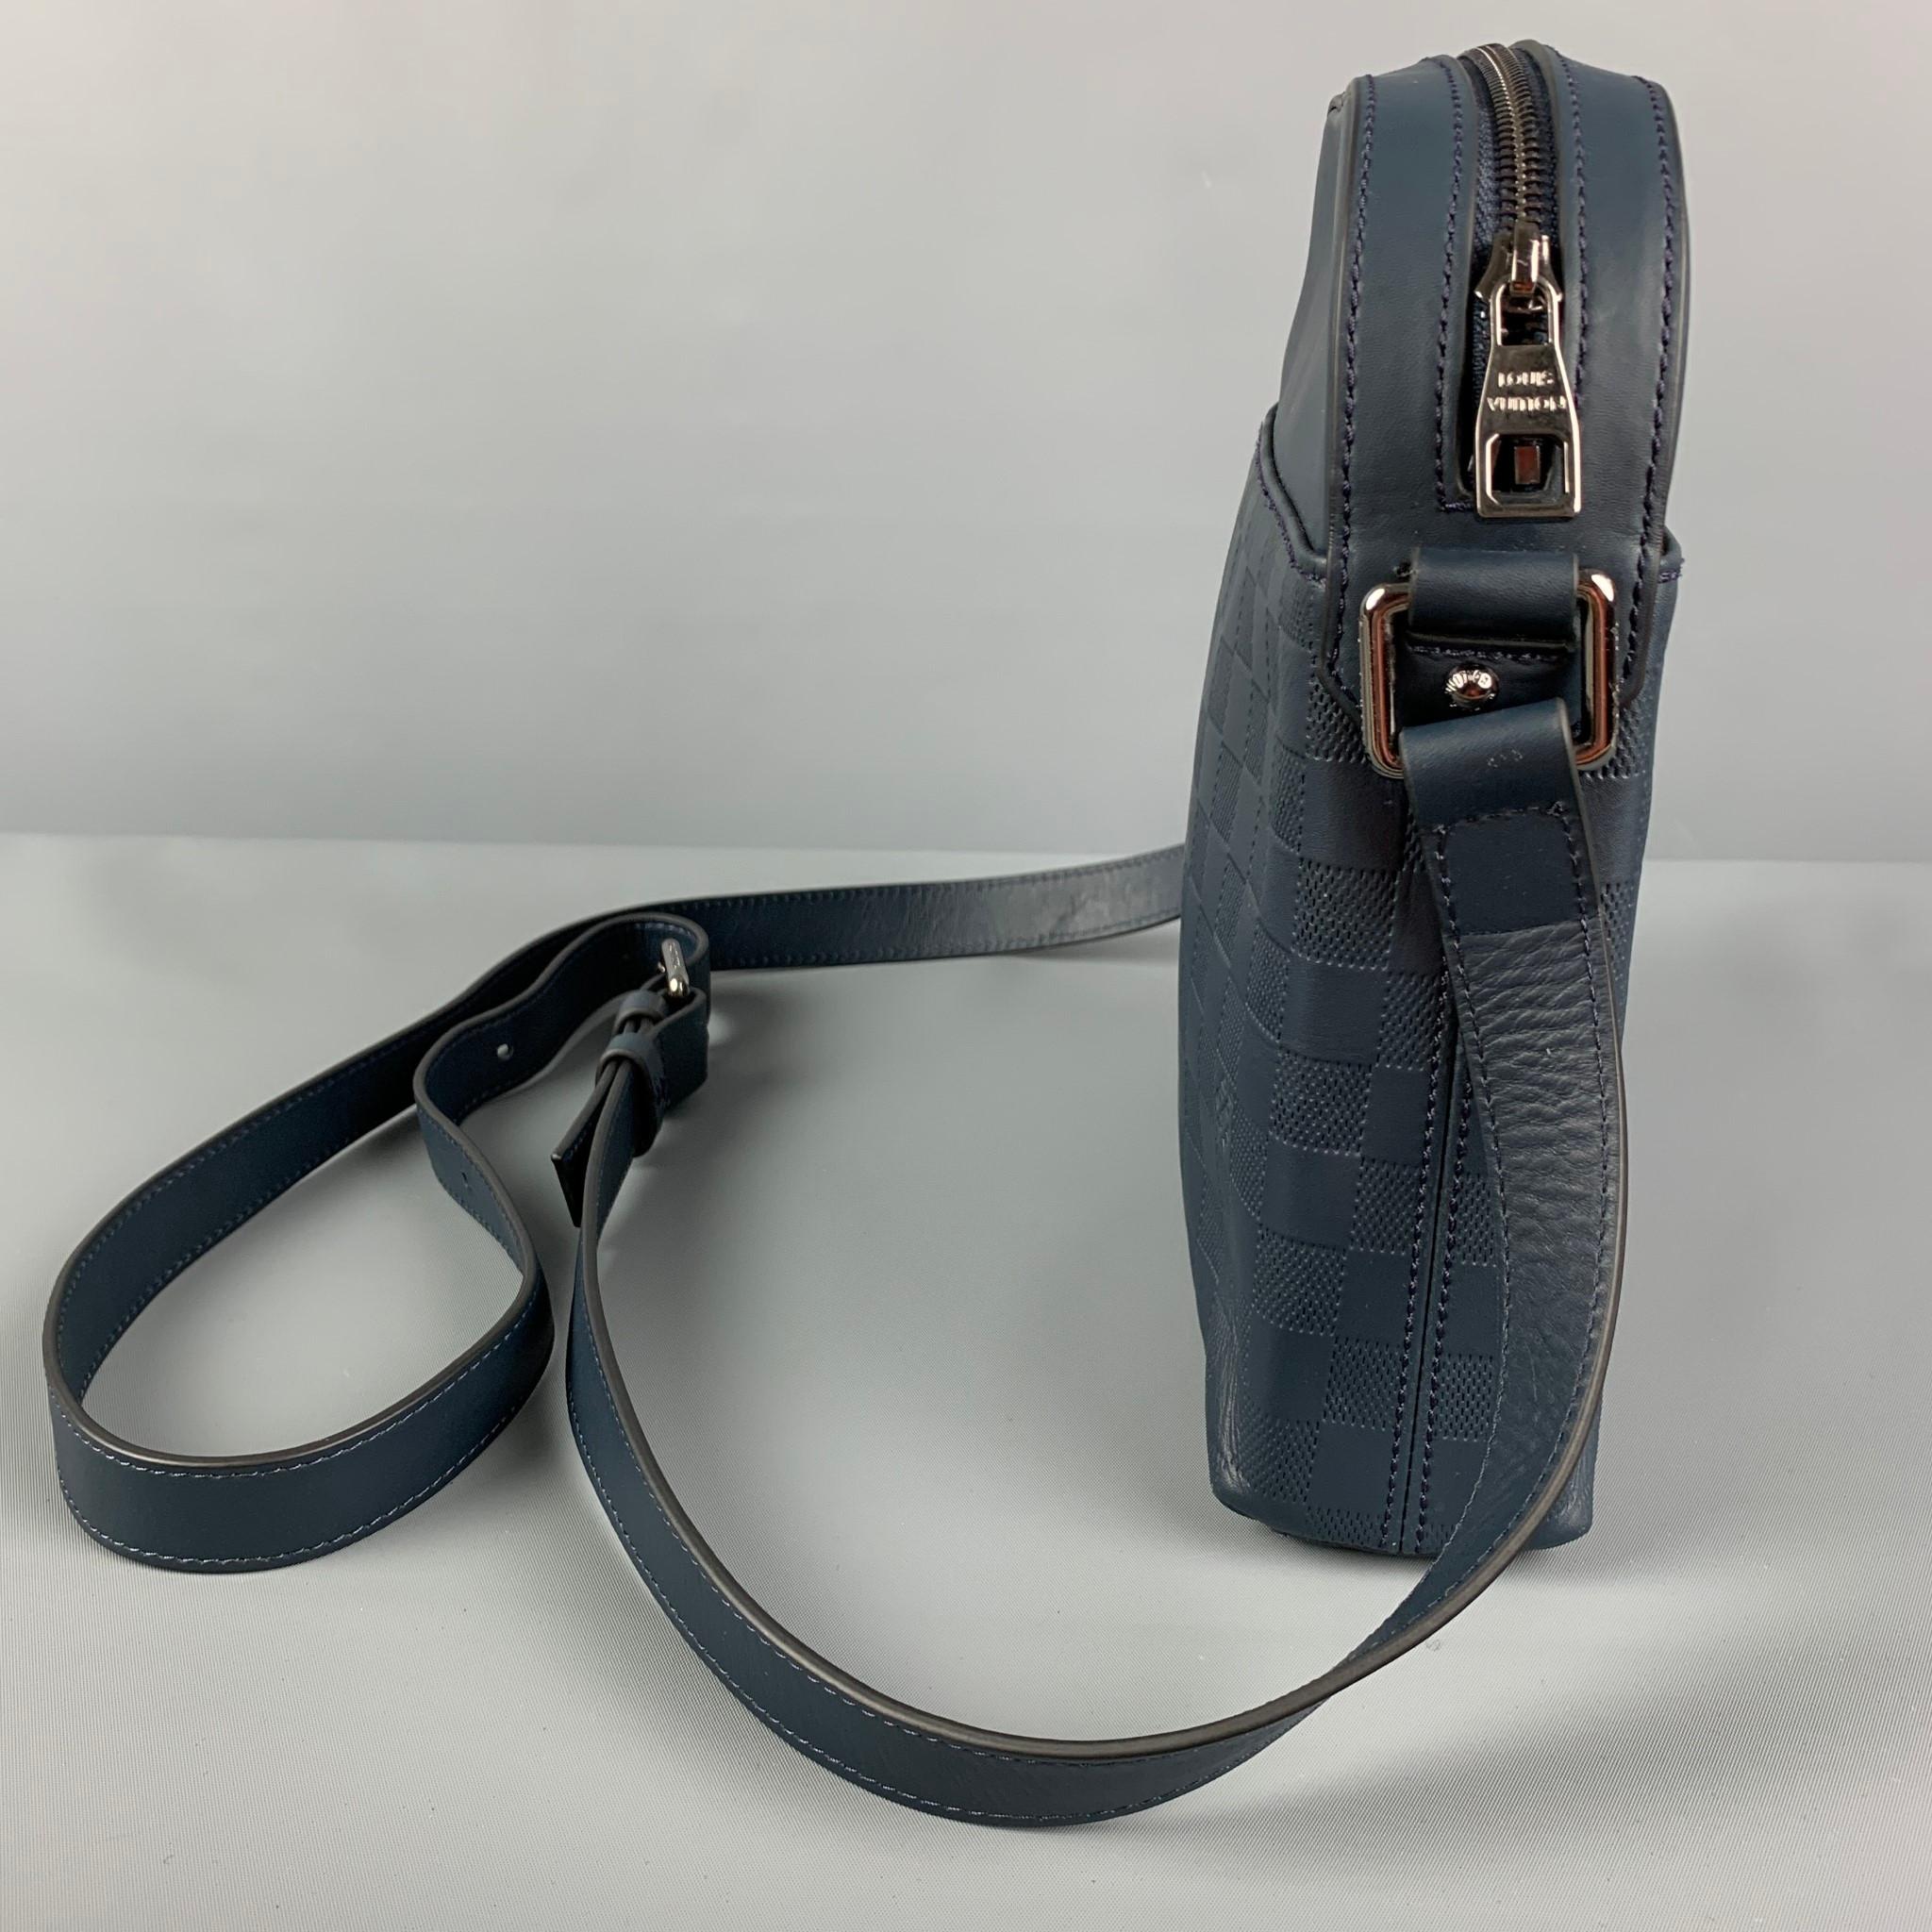 LOUIS VUITTON 'Infini District Pochette' bag comes in a blue damier leather featuring a messenger style, adjustable crossbody strap, silver tone hardware, inner pocket, and a zipper closure. Includes dust bag. Made in France. 

Very Good Pre-Owned